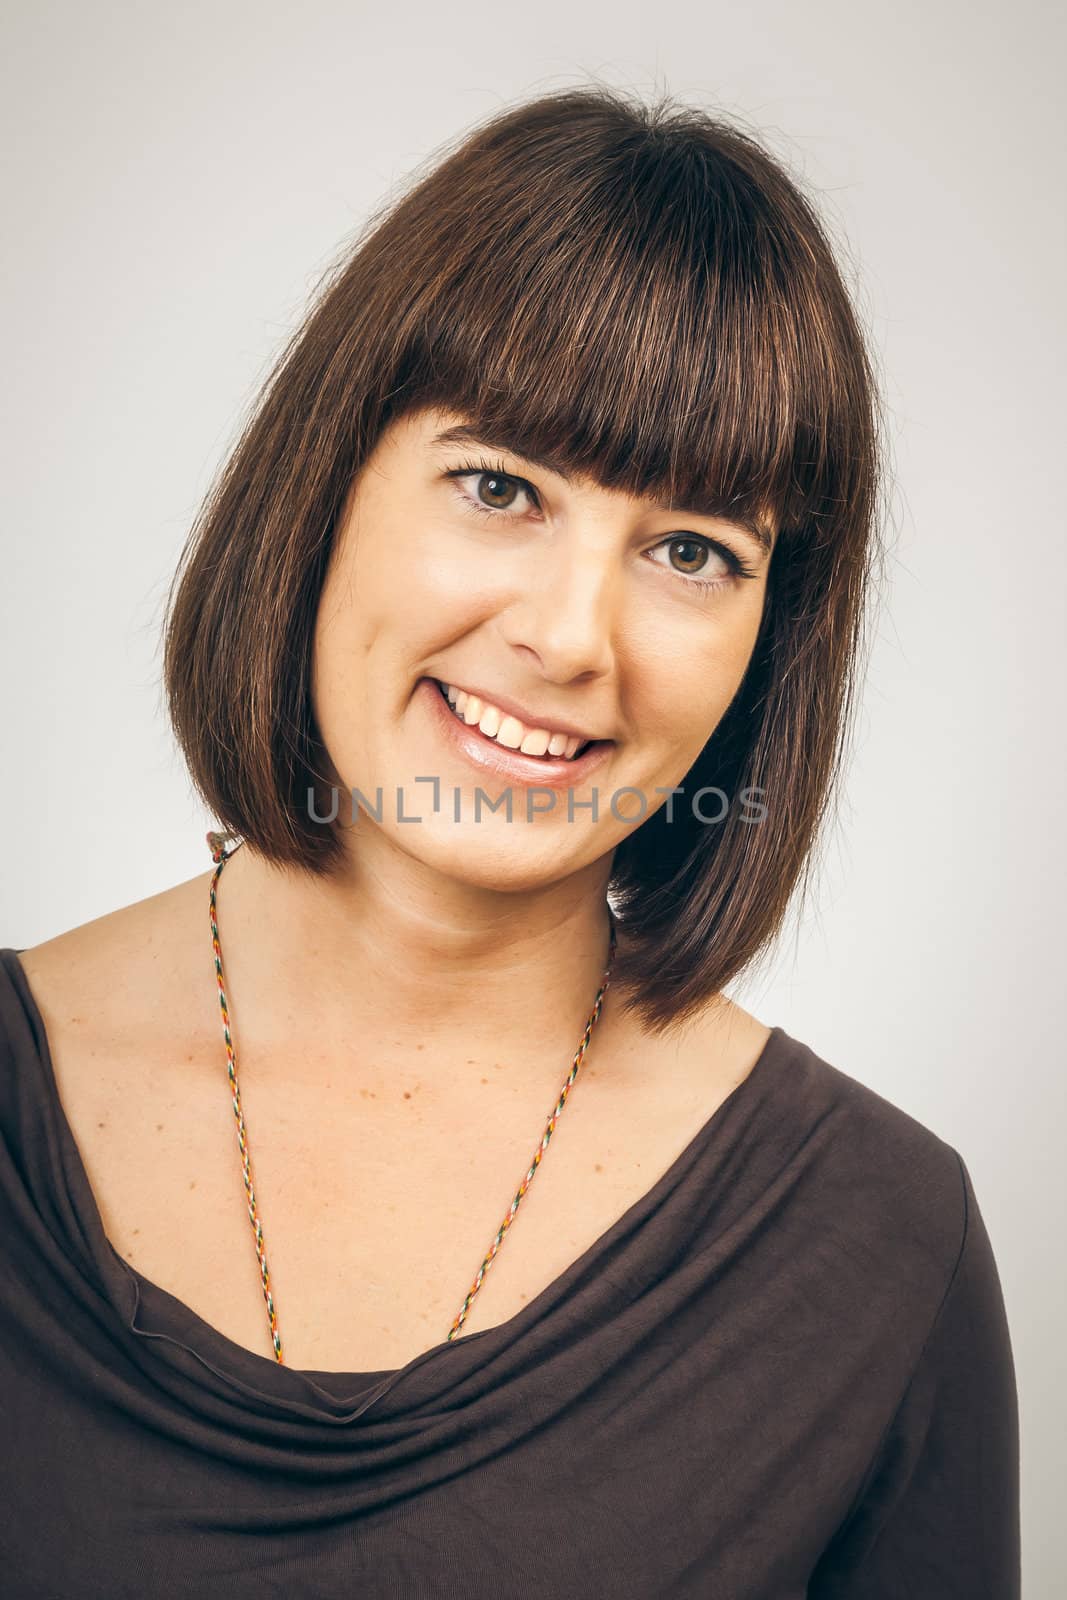 An image of a beautiful smiling woman